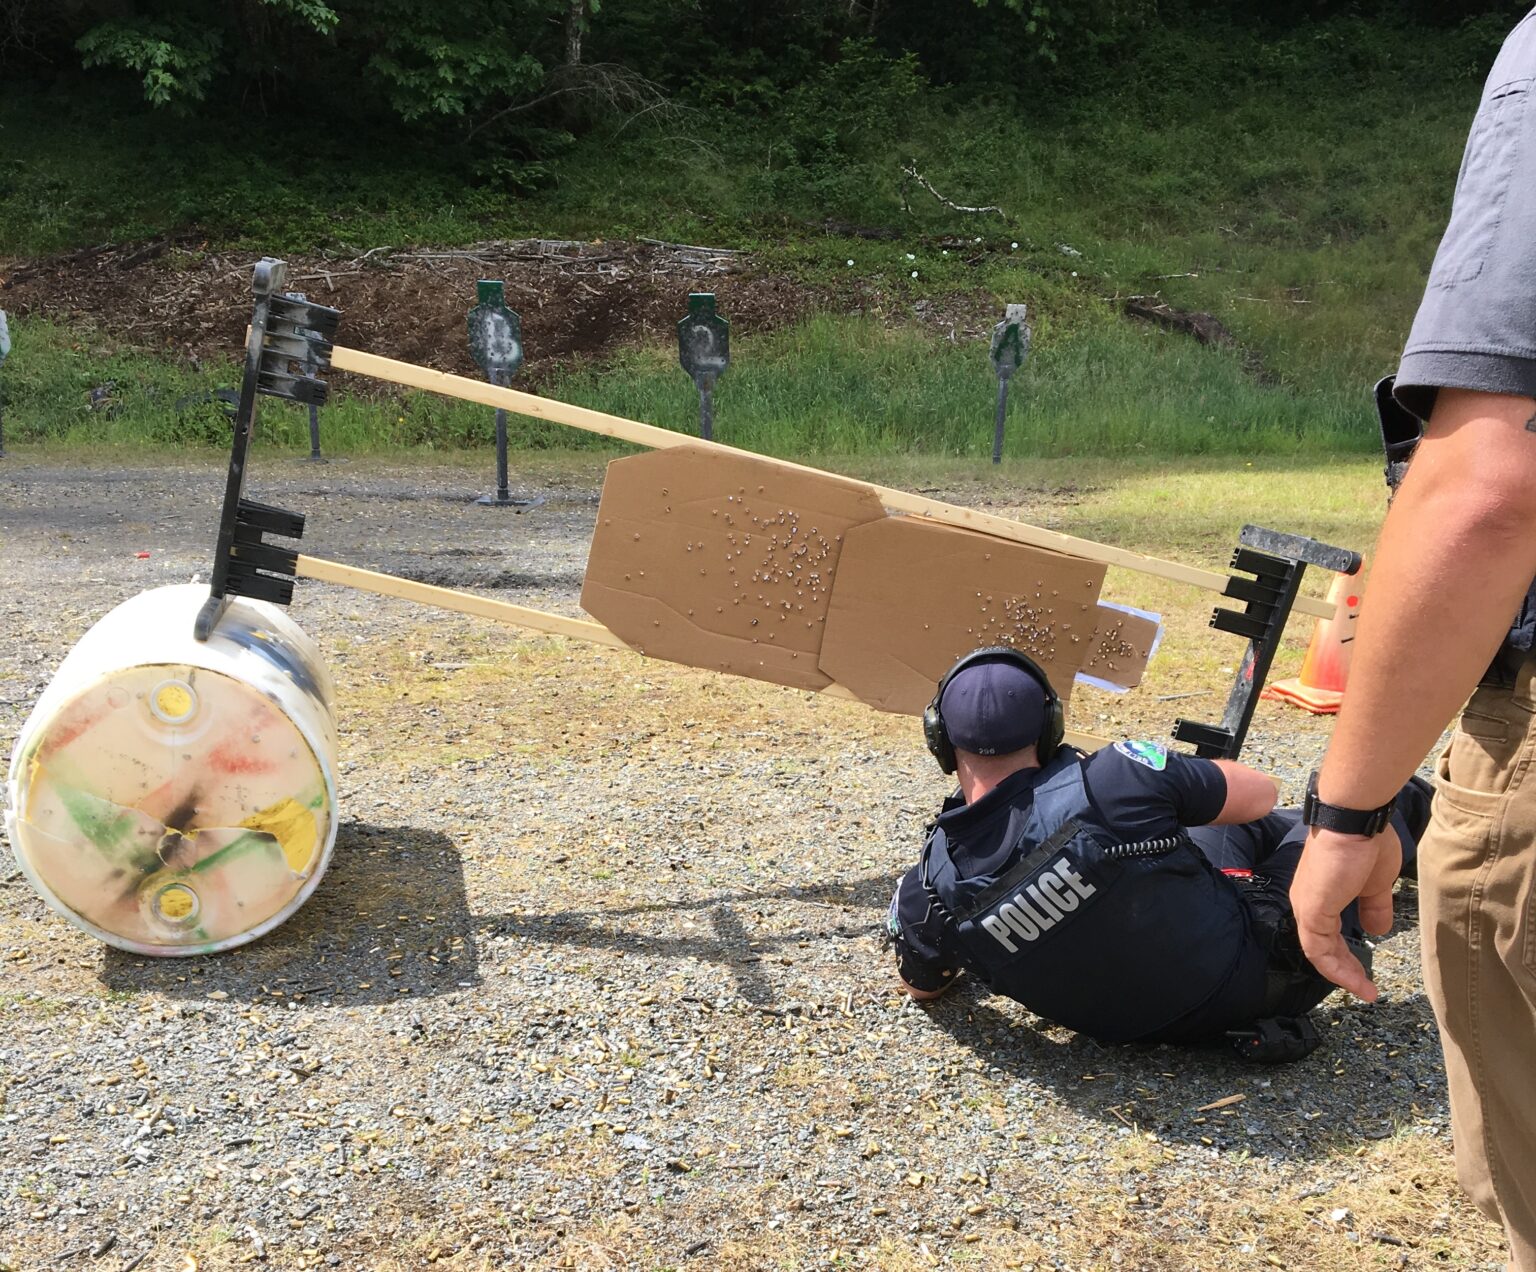 Trainees from the Bellingham Police Department behind a used target.